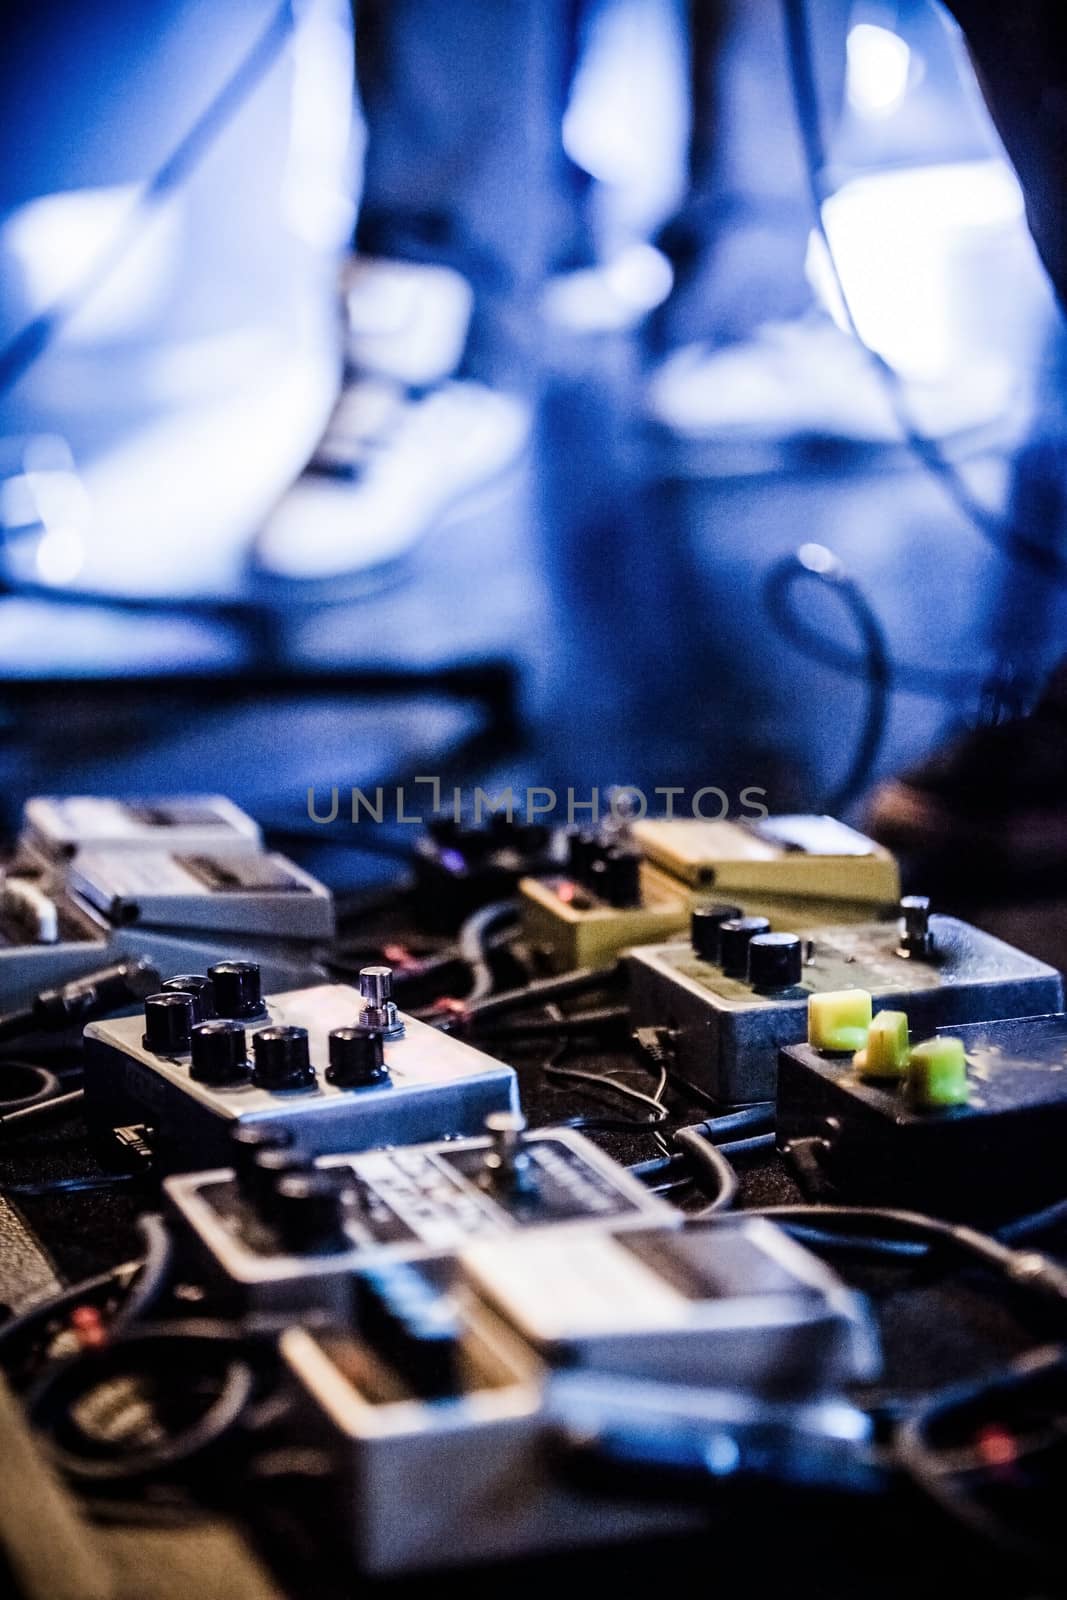 Guitar Pedals on a Stage with Live Band Performing During a Show. Low light image with copyspace